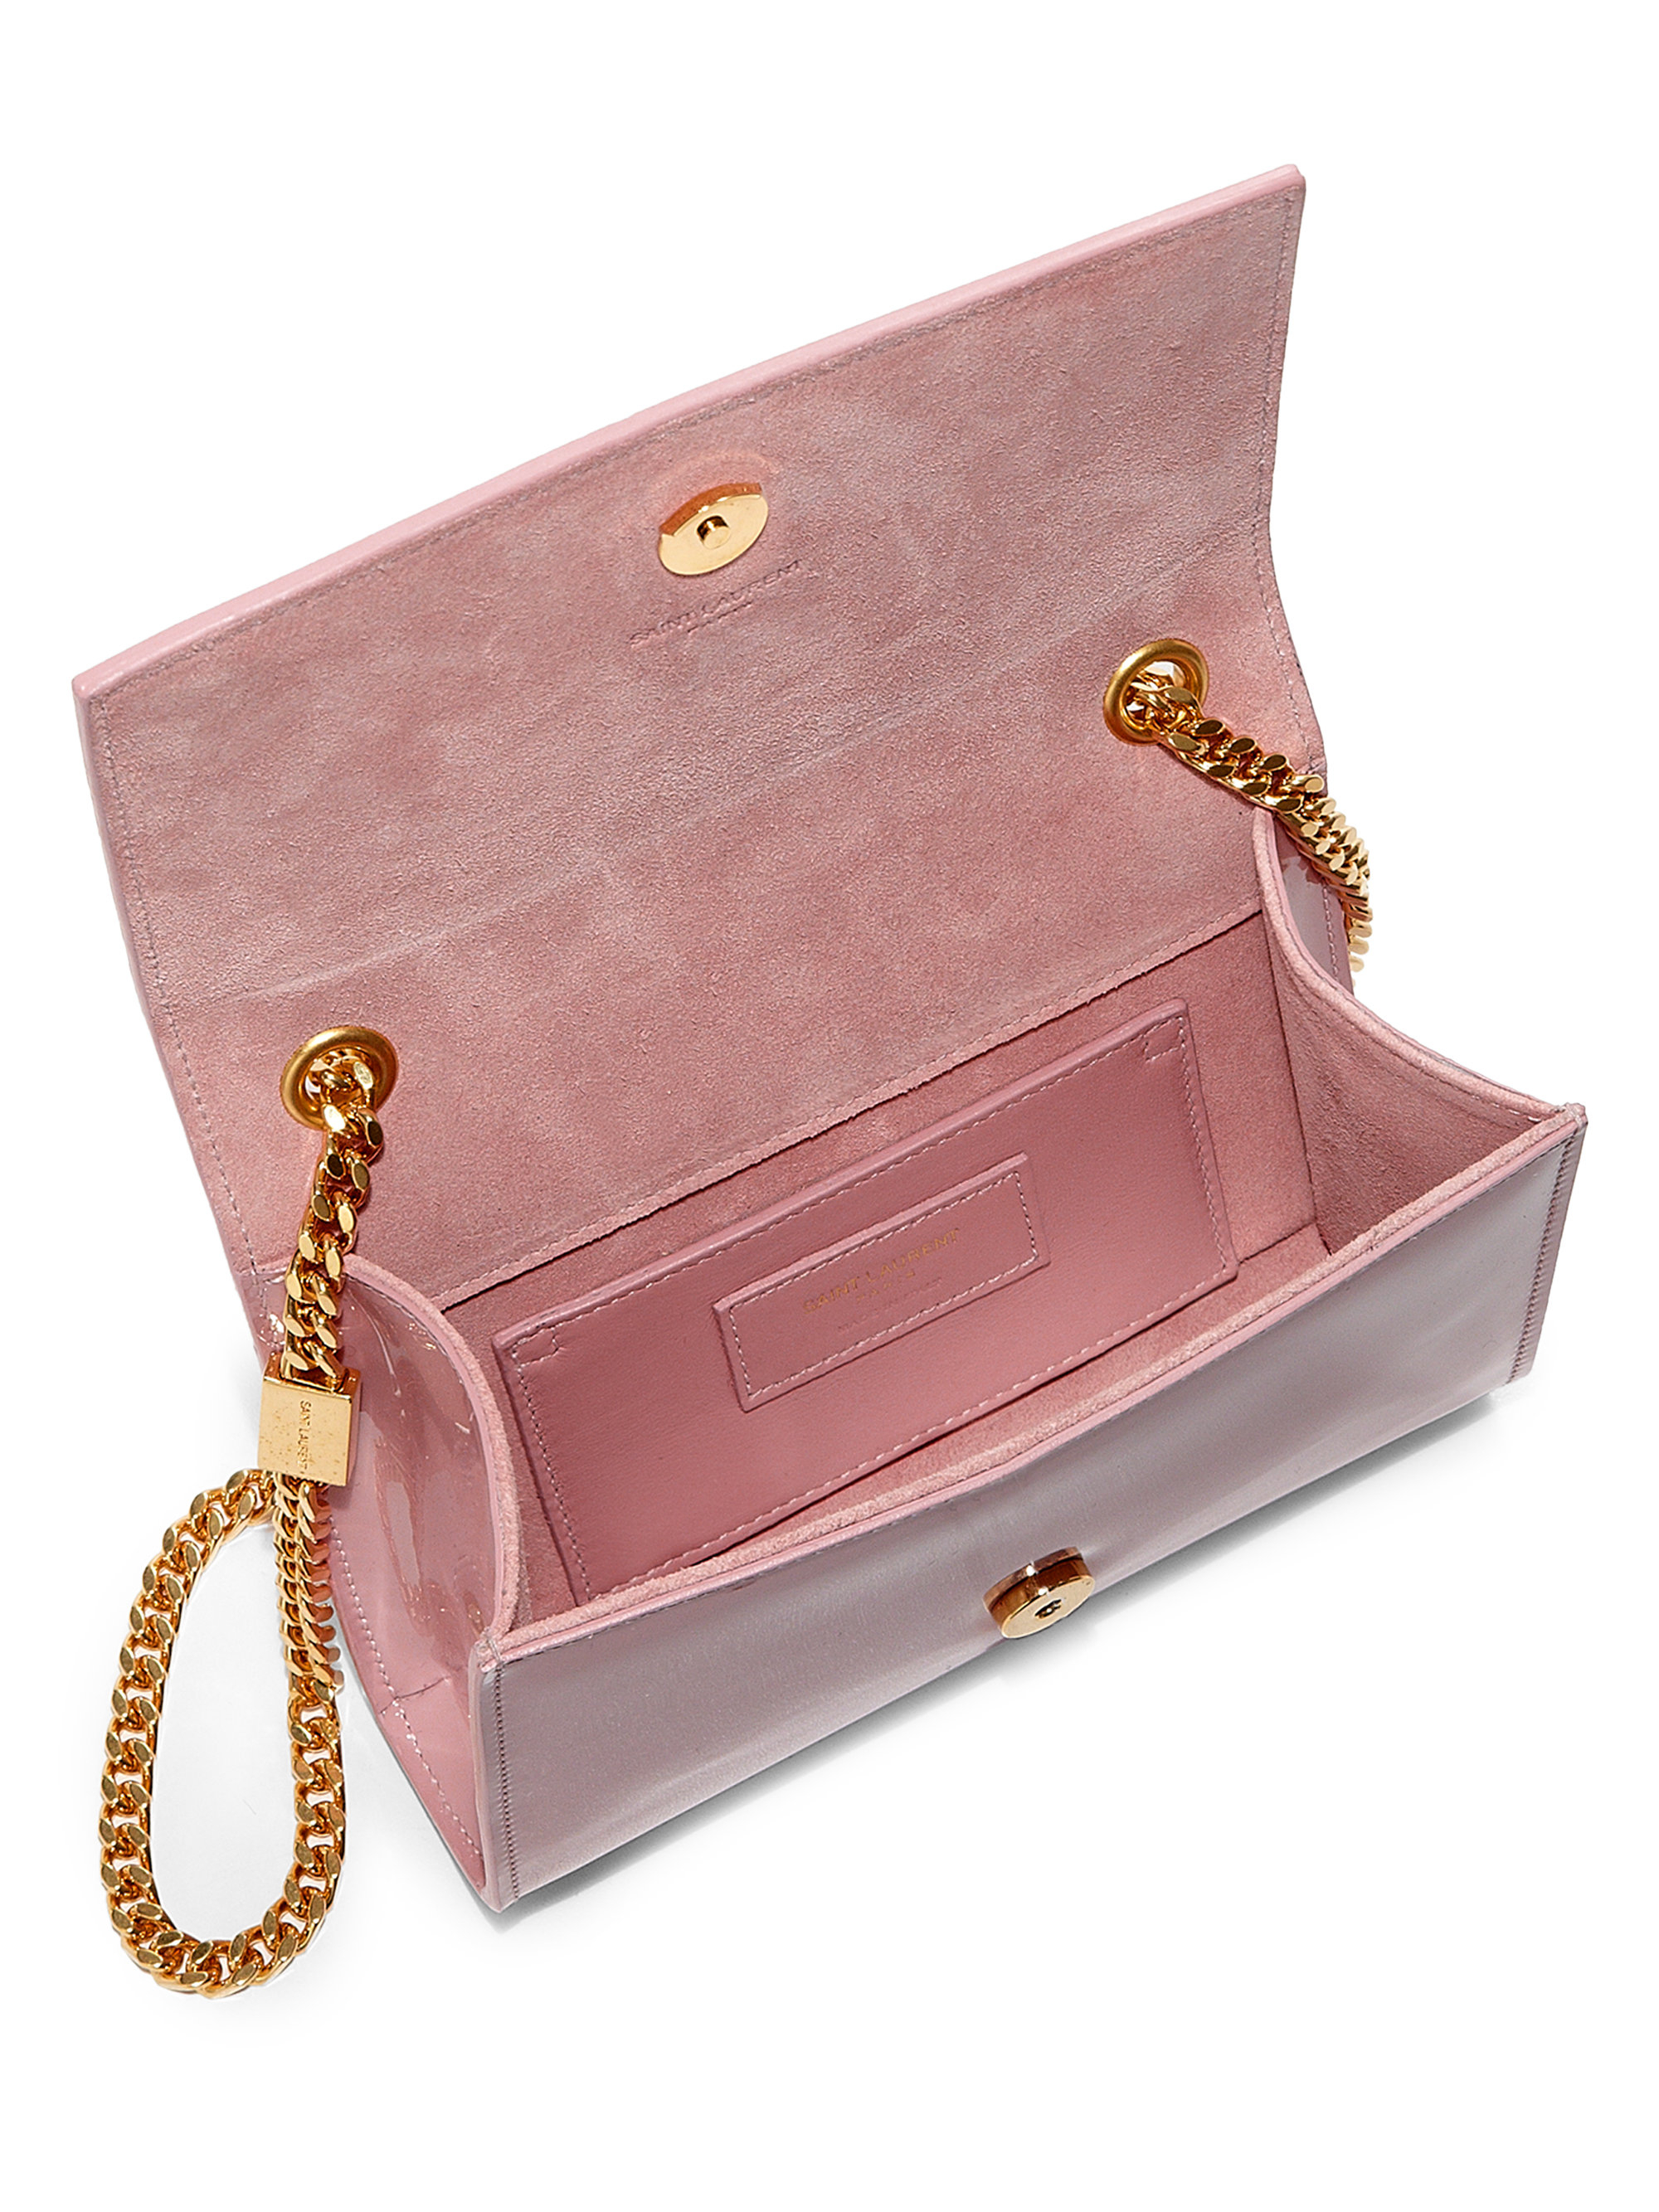 Saint Laurent Monogram Small Patent Leather Chain Crossbody Bag in Pale Rose (Pink) - Lyst